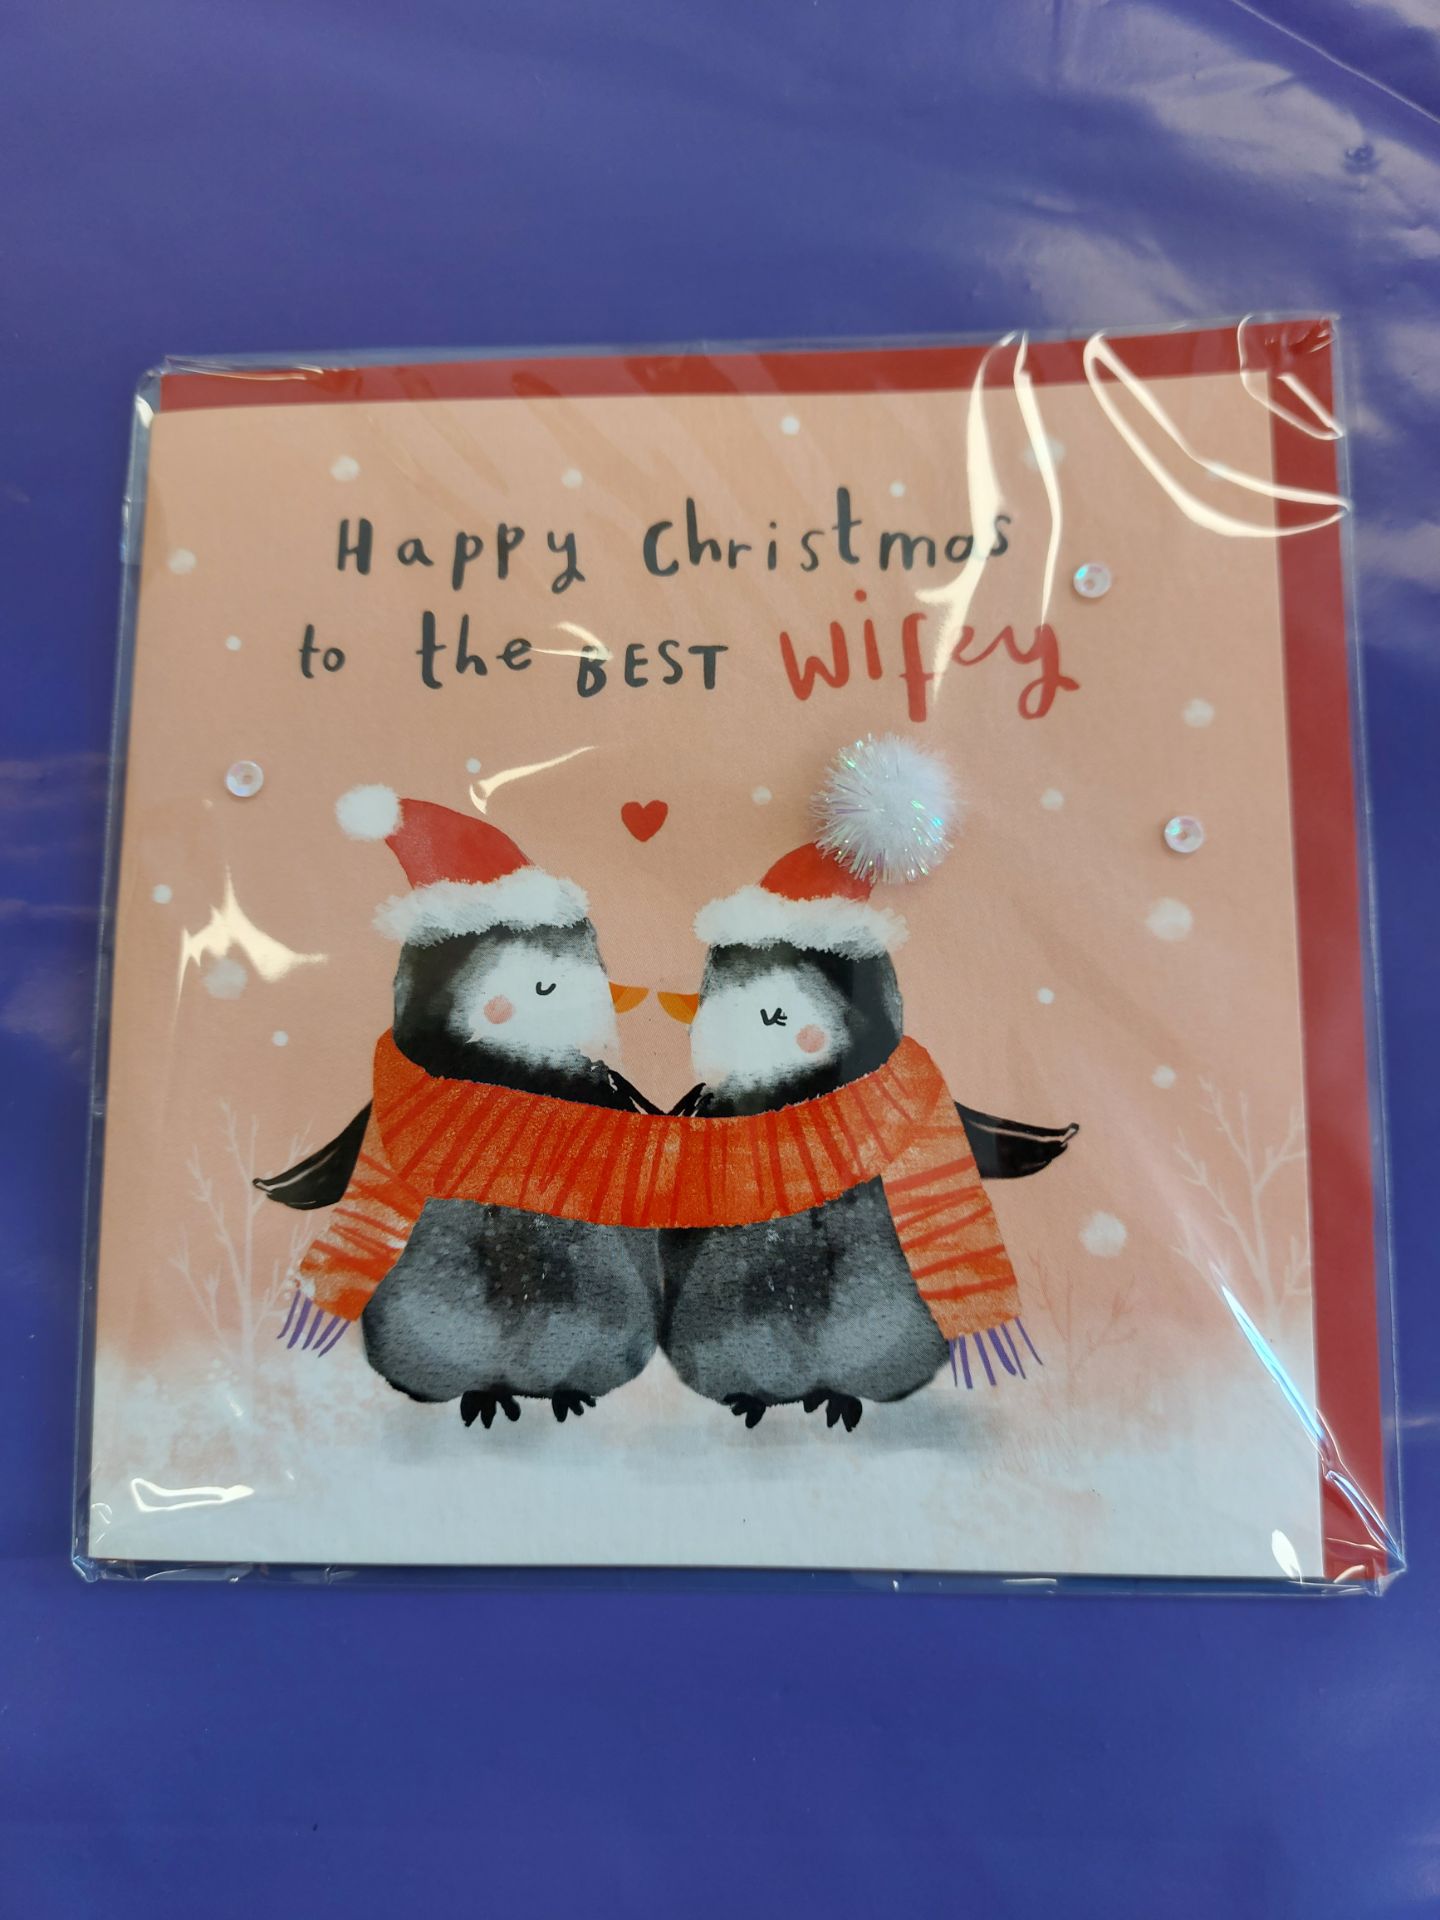 Christmas Cards From Paperchase - Image 2 of 2